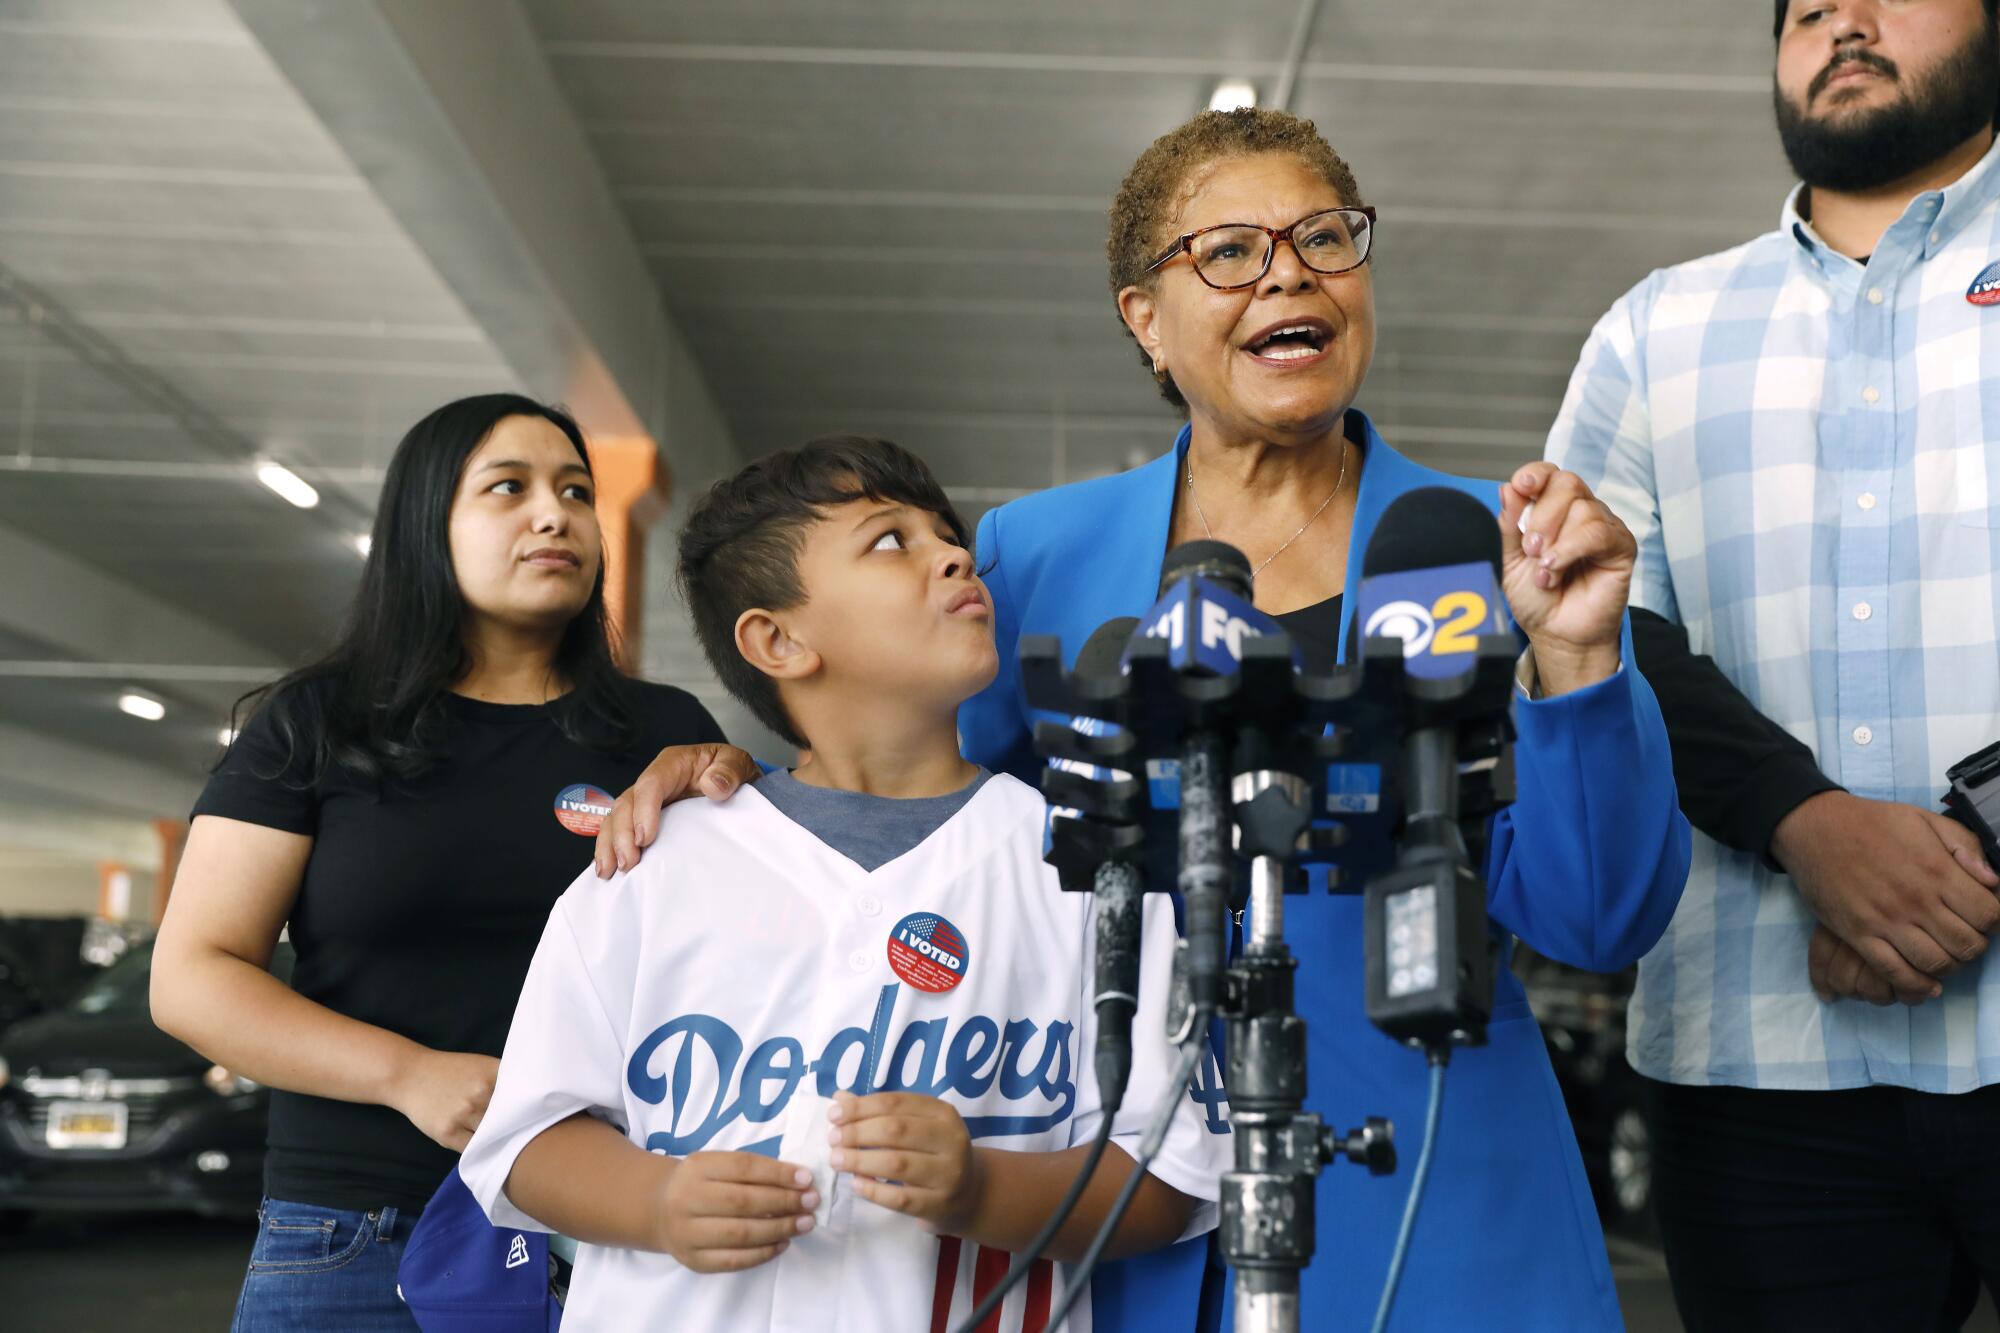 L.A. mayoral candidate Karen Bass speaks to the media after casting her ballot.